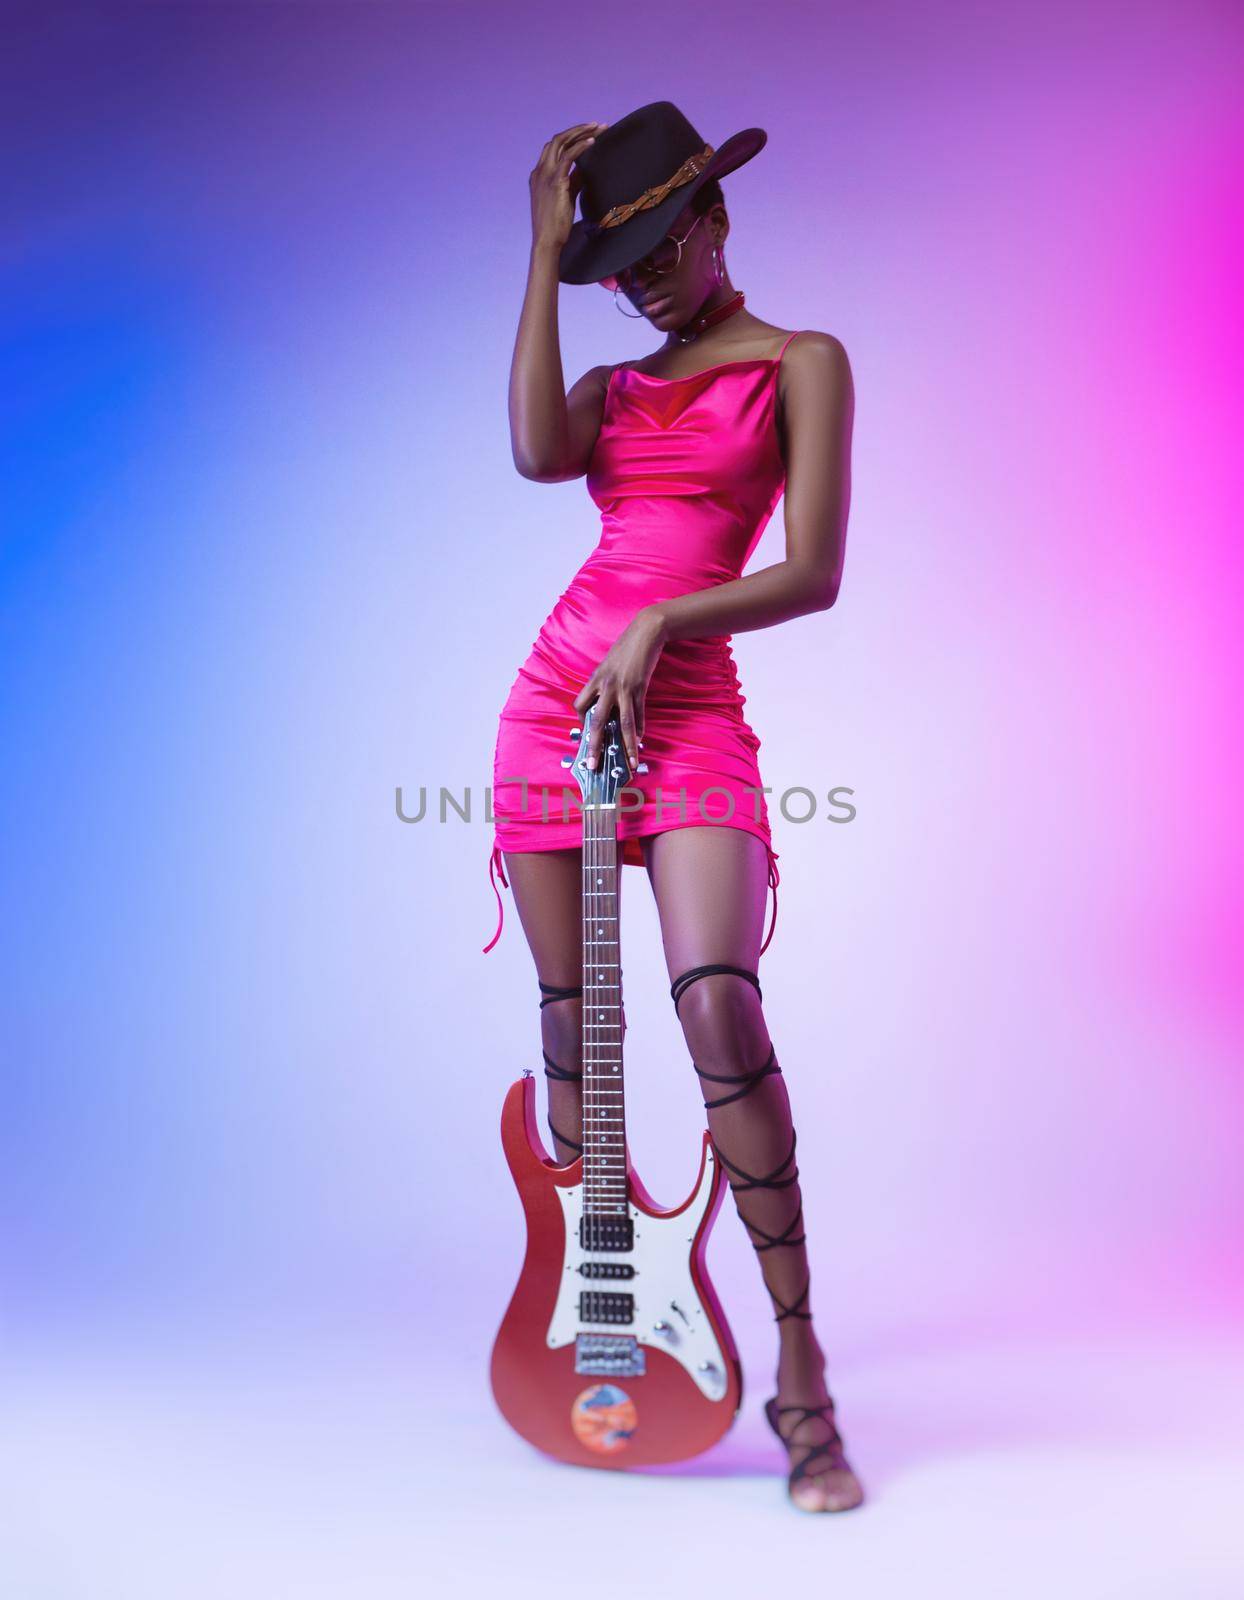 the dark-skinned woman in a pink short dress and a hat with an electric guitar